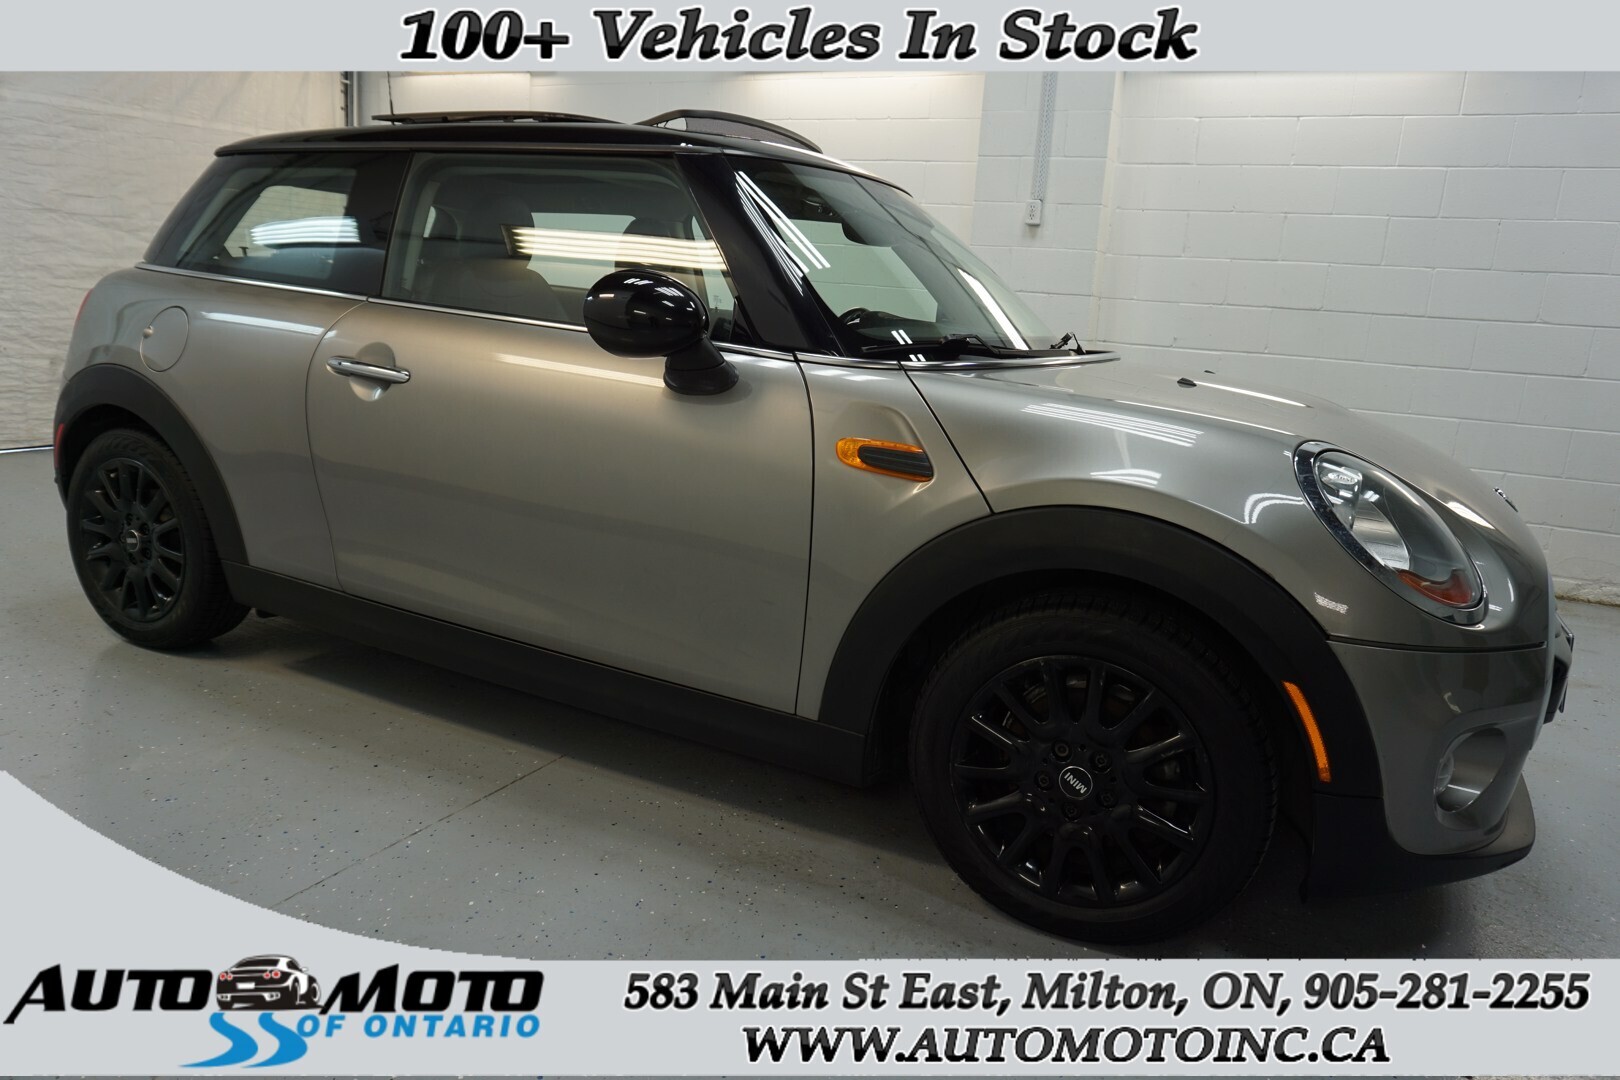 2017 MINI Cooper 1.6 TURBO *ACCIDENT FREE* CERTIFIED LEATHER HEATED